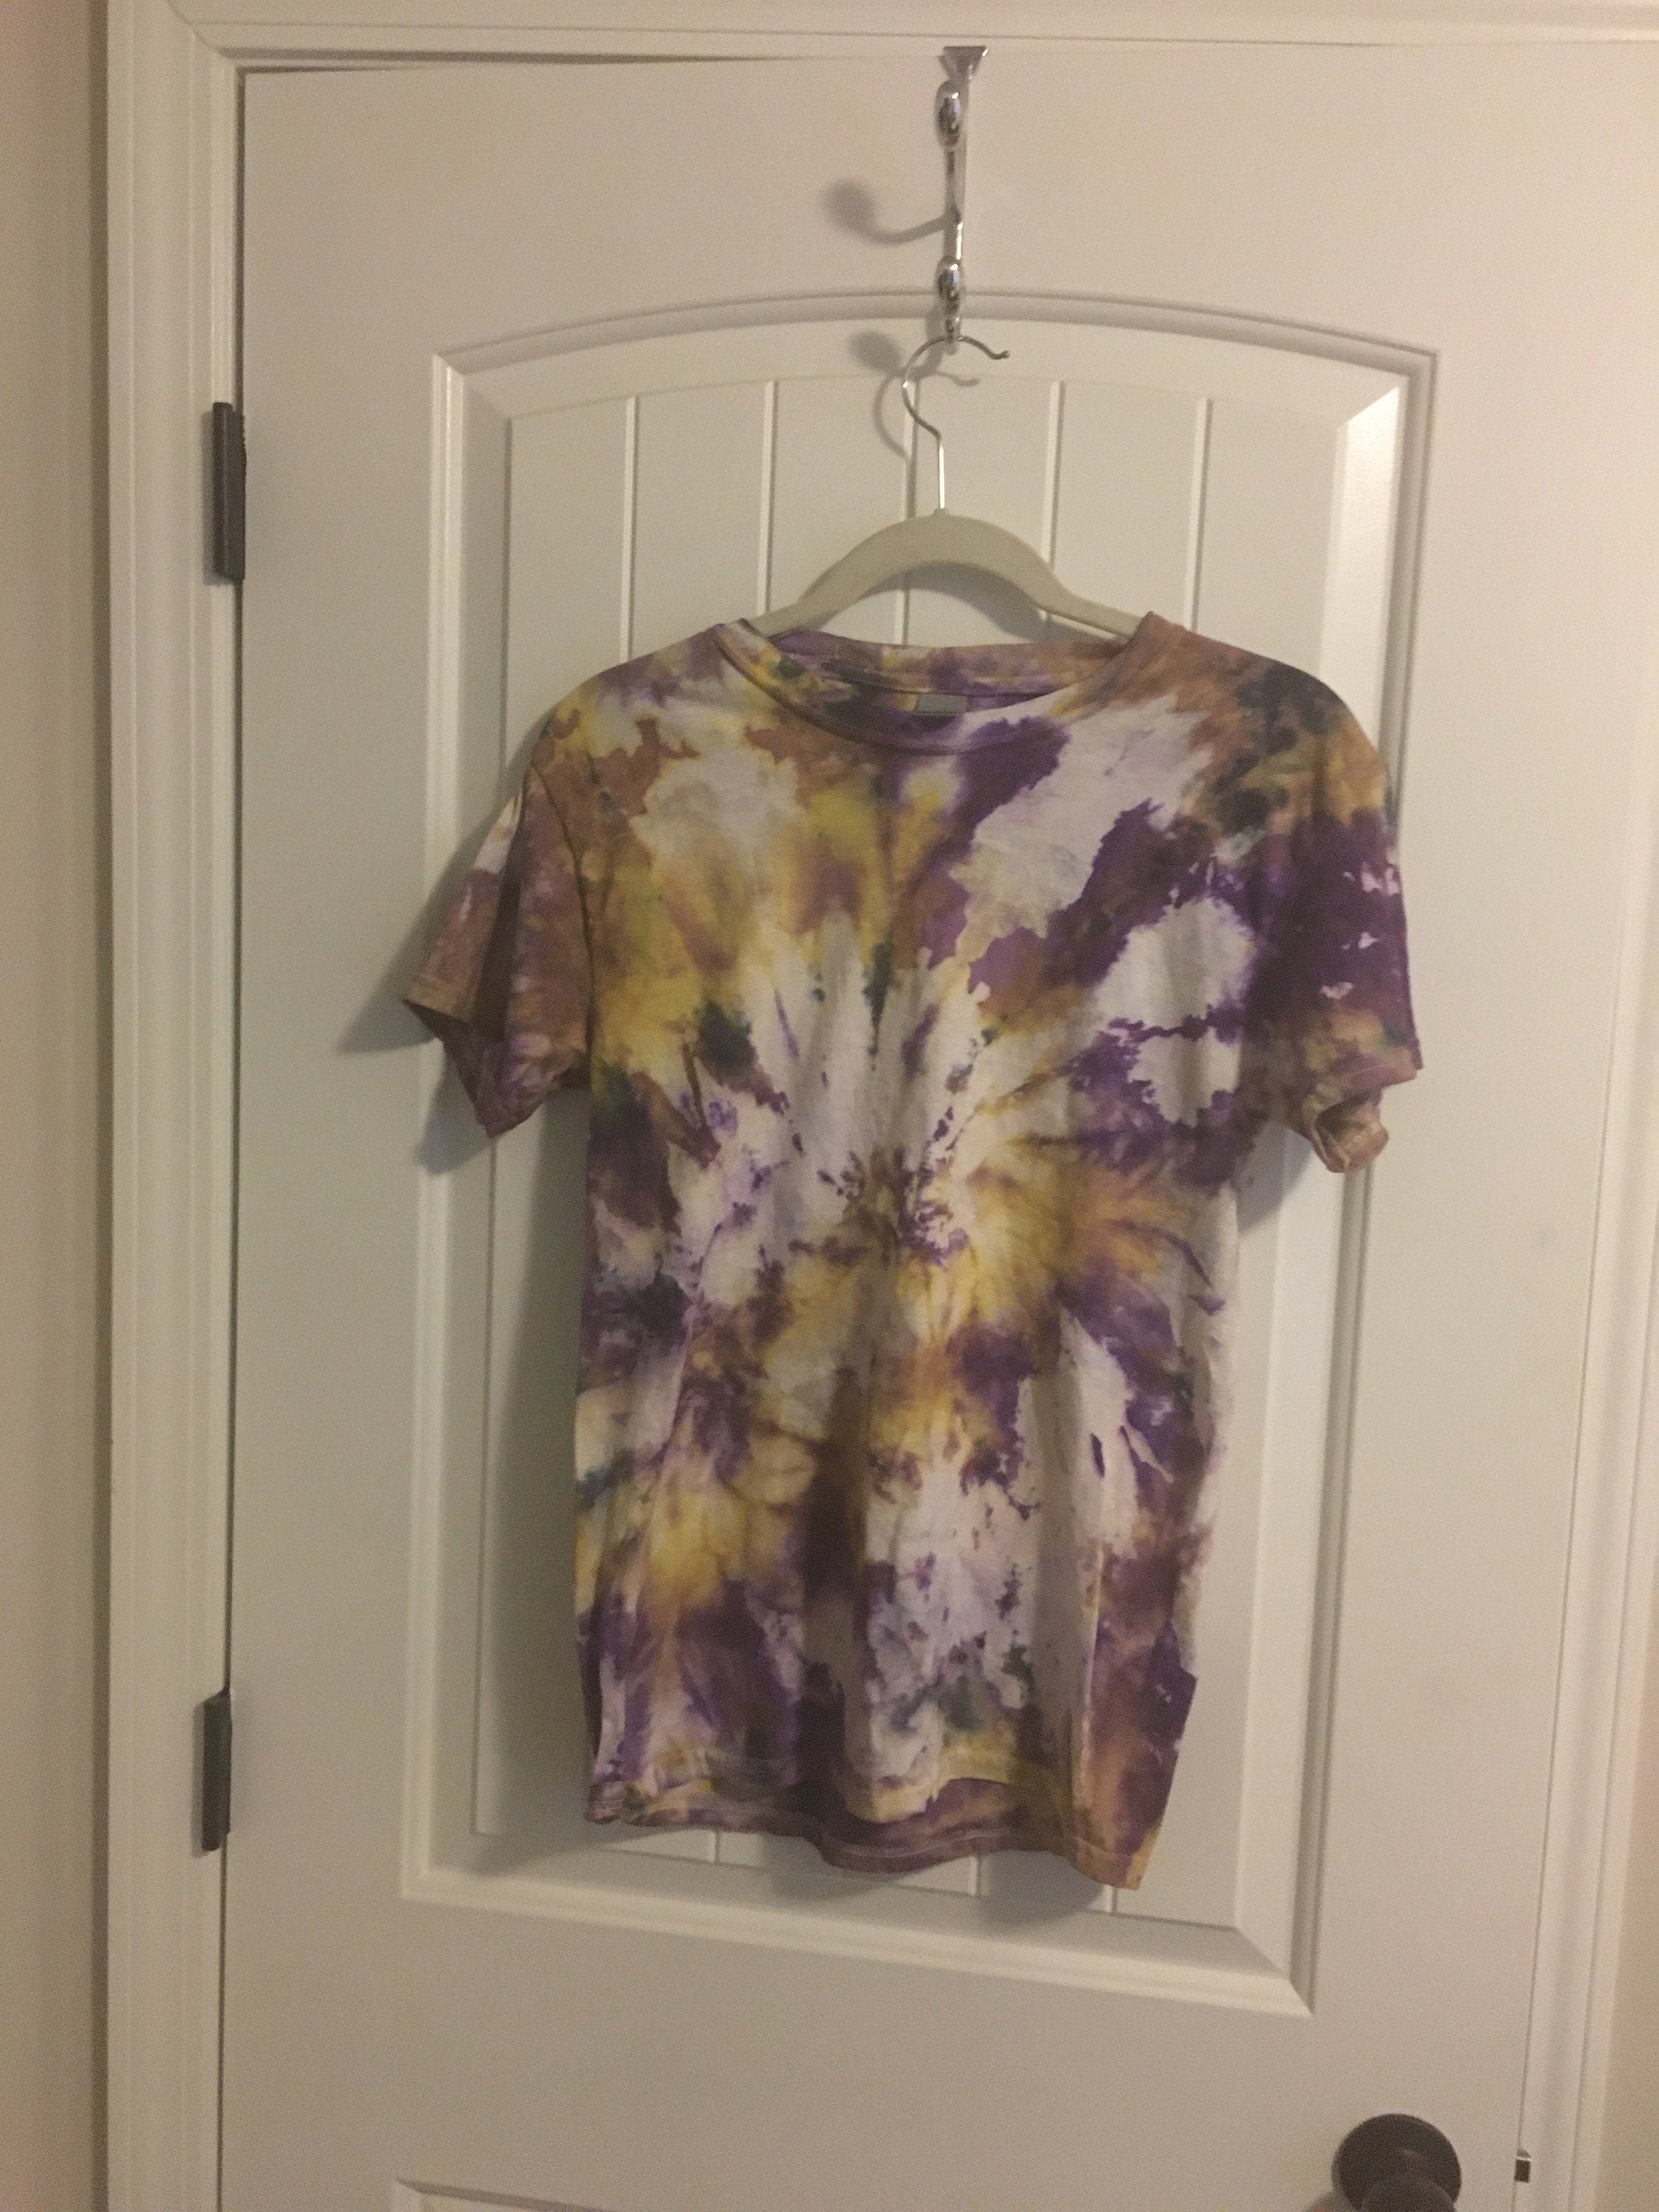 Handmade Purple and Yellow Tie Dyed Shirt 15 percent goes to | Etsy